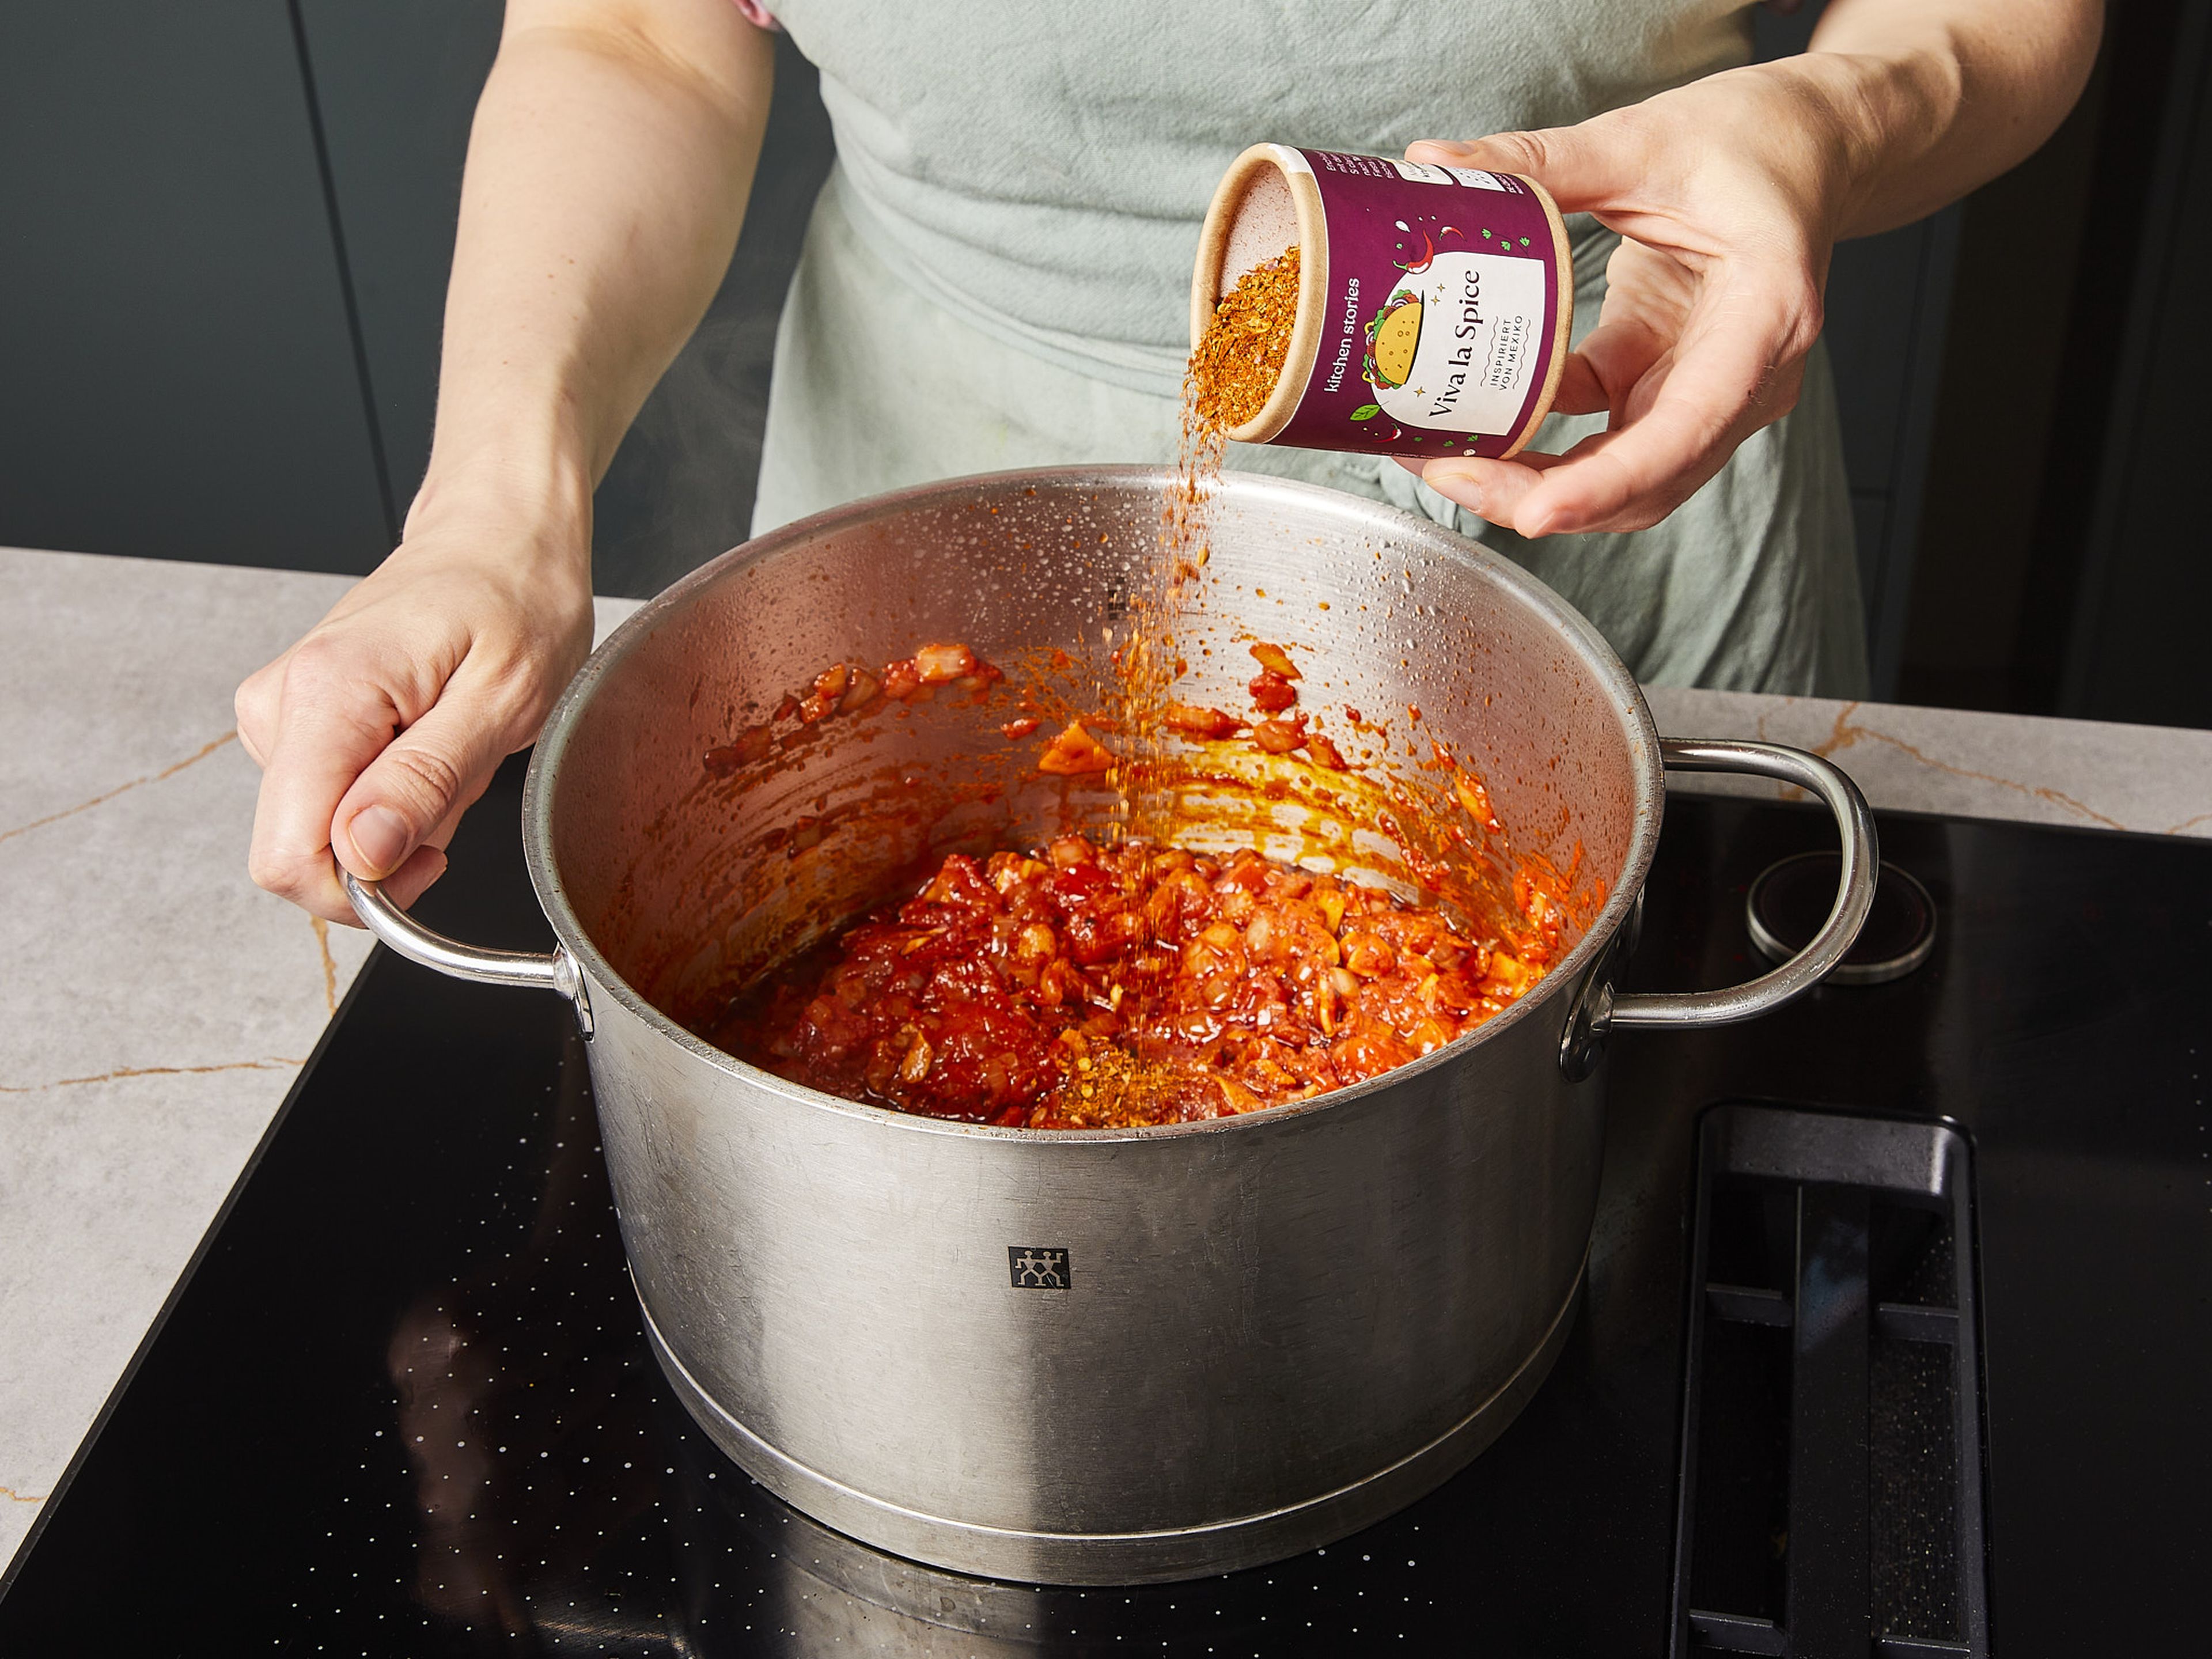 Add tomatoes and garlic, fry for approx. 2 min. Then add our VIVA LA SPICE seasoning and beef broth and mix. Add chicken pieces back to the pot, bring to a boil and simmer over medium-high heat for approx. 25–30 min. Meanwhile, chop cilantro. Cut limes into wedges.